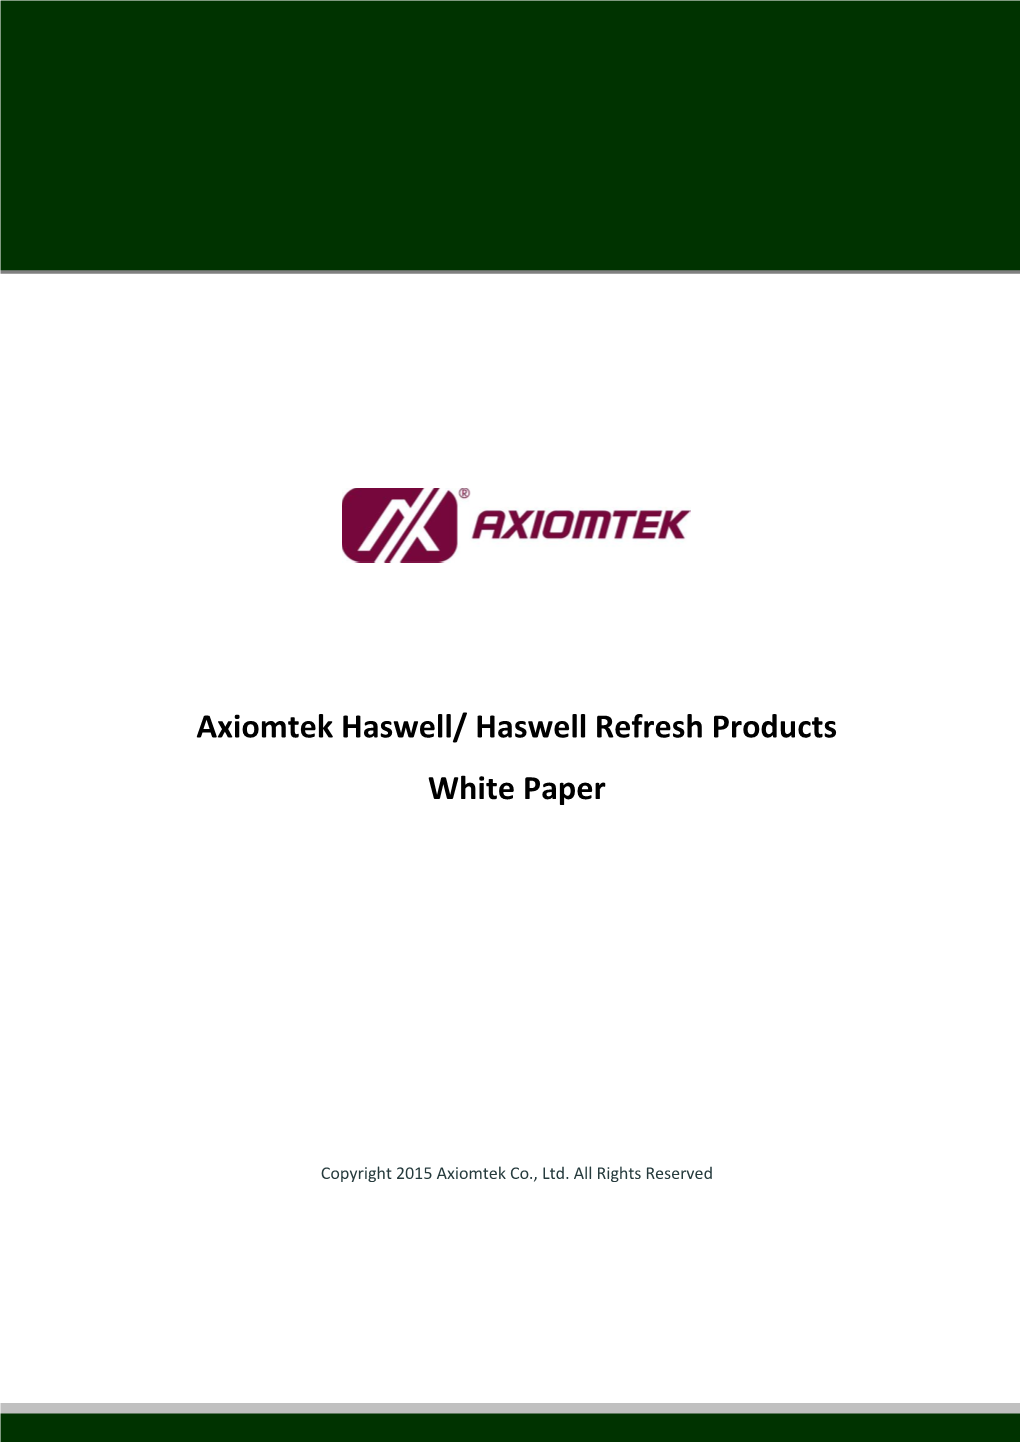 Axiomtek Haswell/ Haswell Refresh Products White Paper